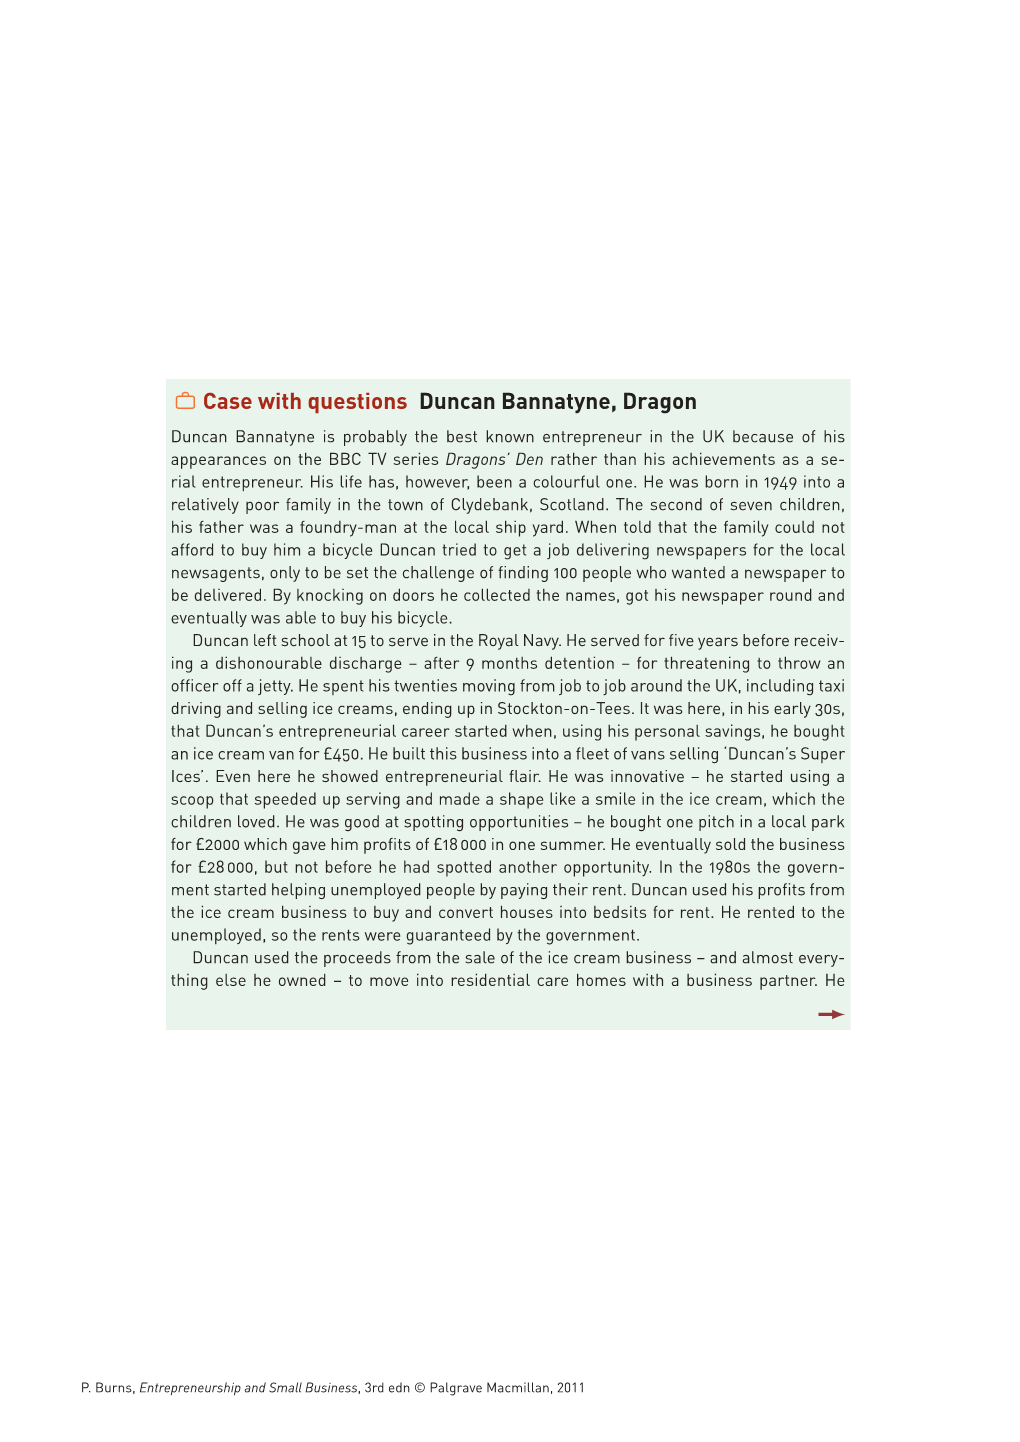 Case with Questions J Duncan Bannatyne, Dragon